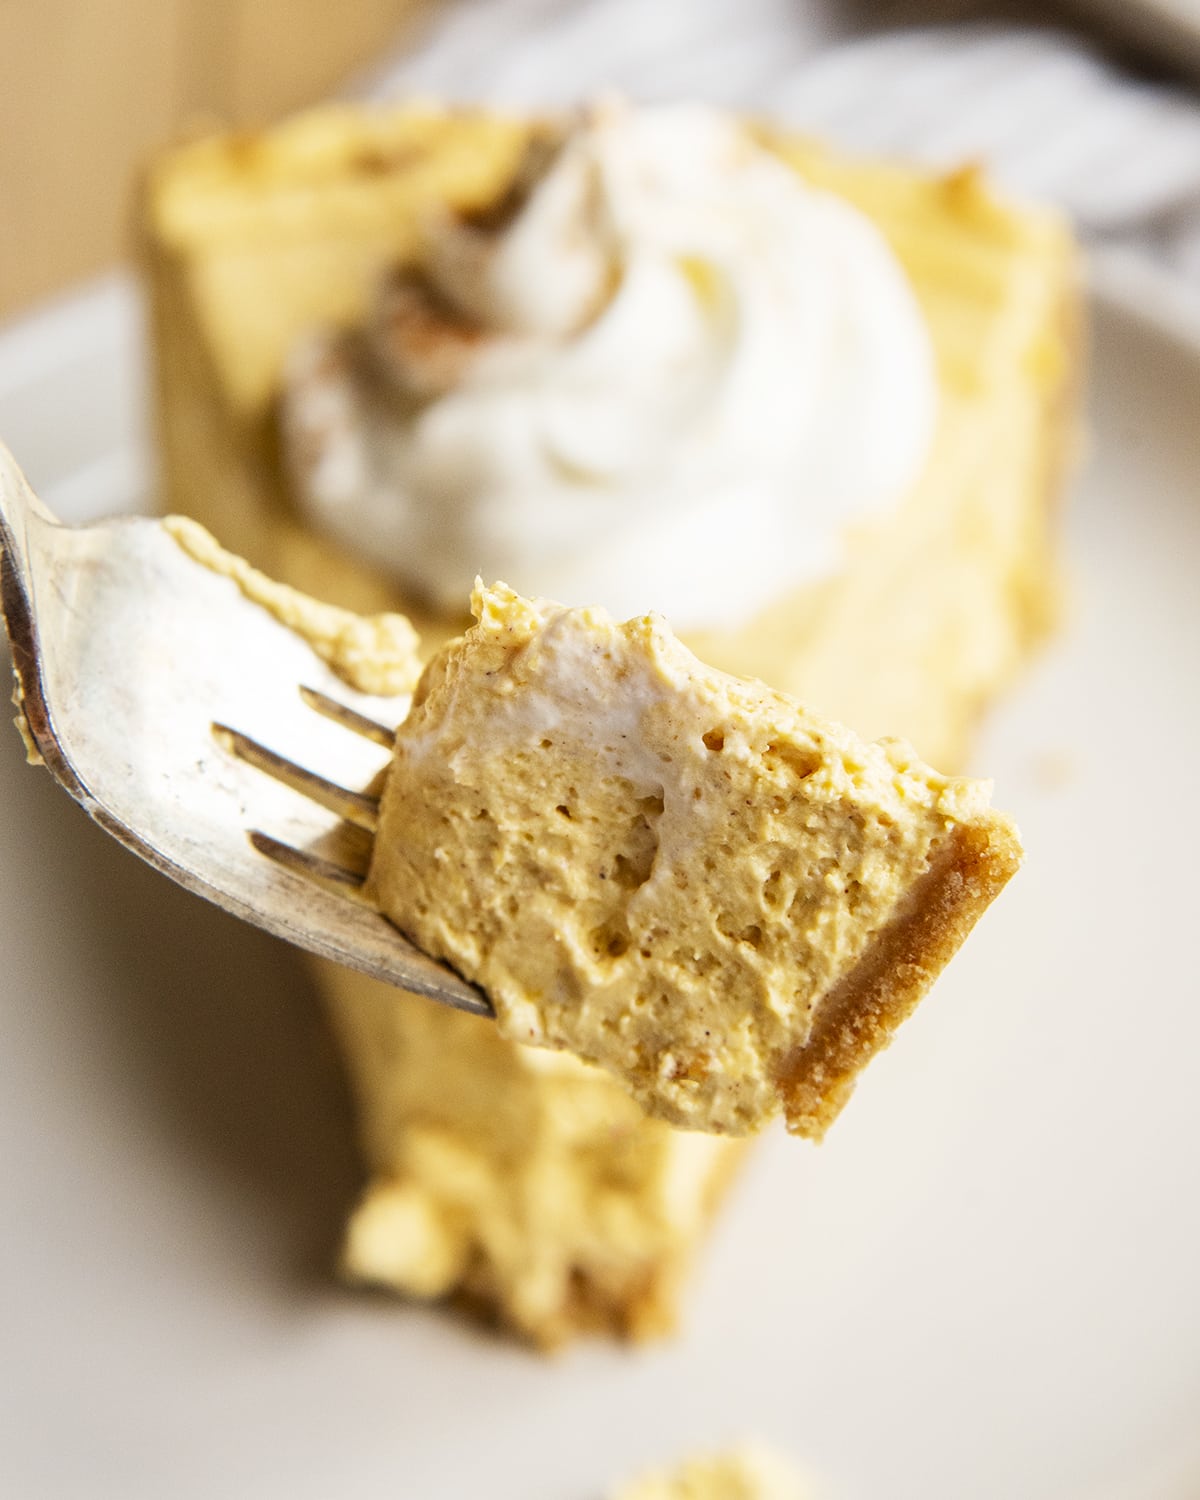 A bite of pumpkin cheesecake on a fork being held above the whole piece.